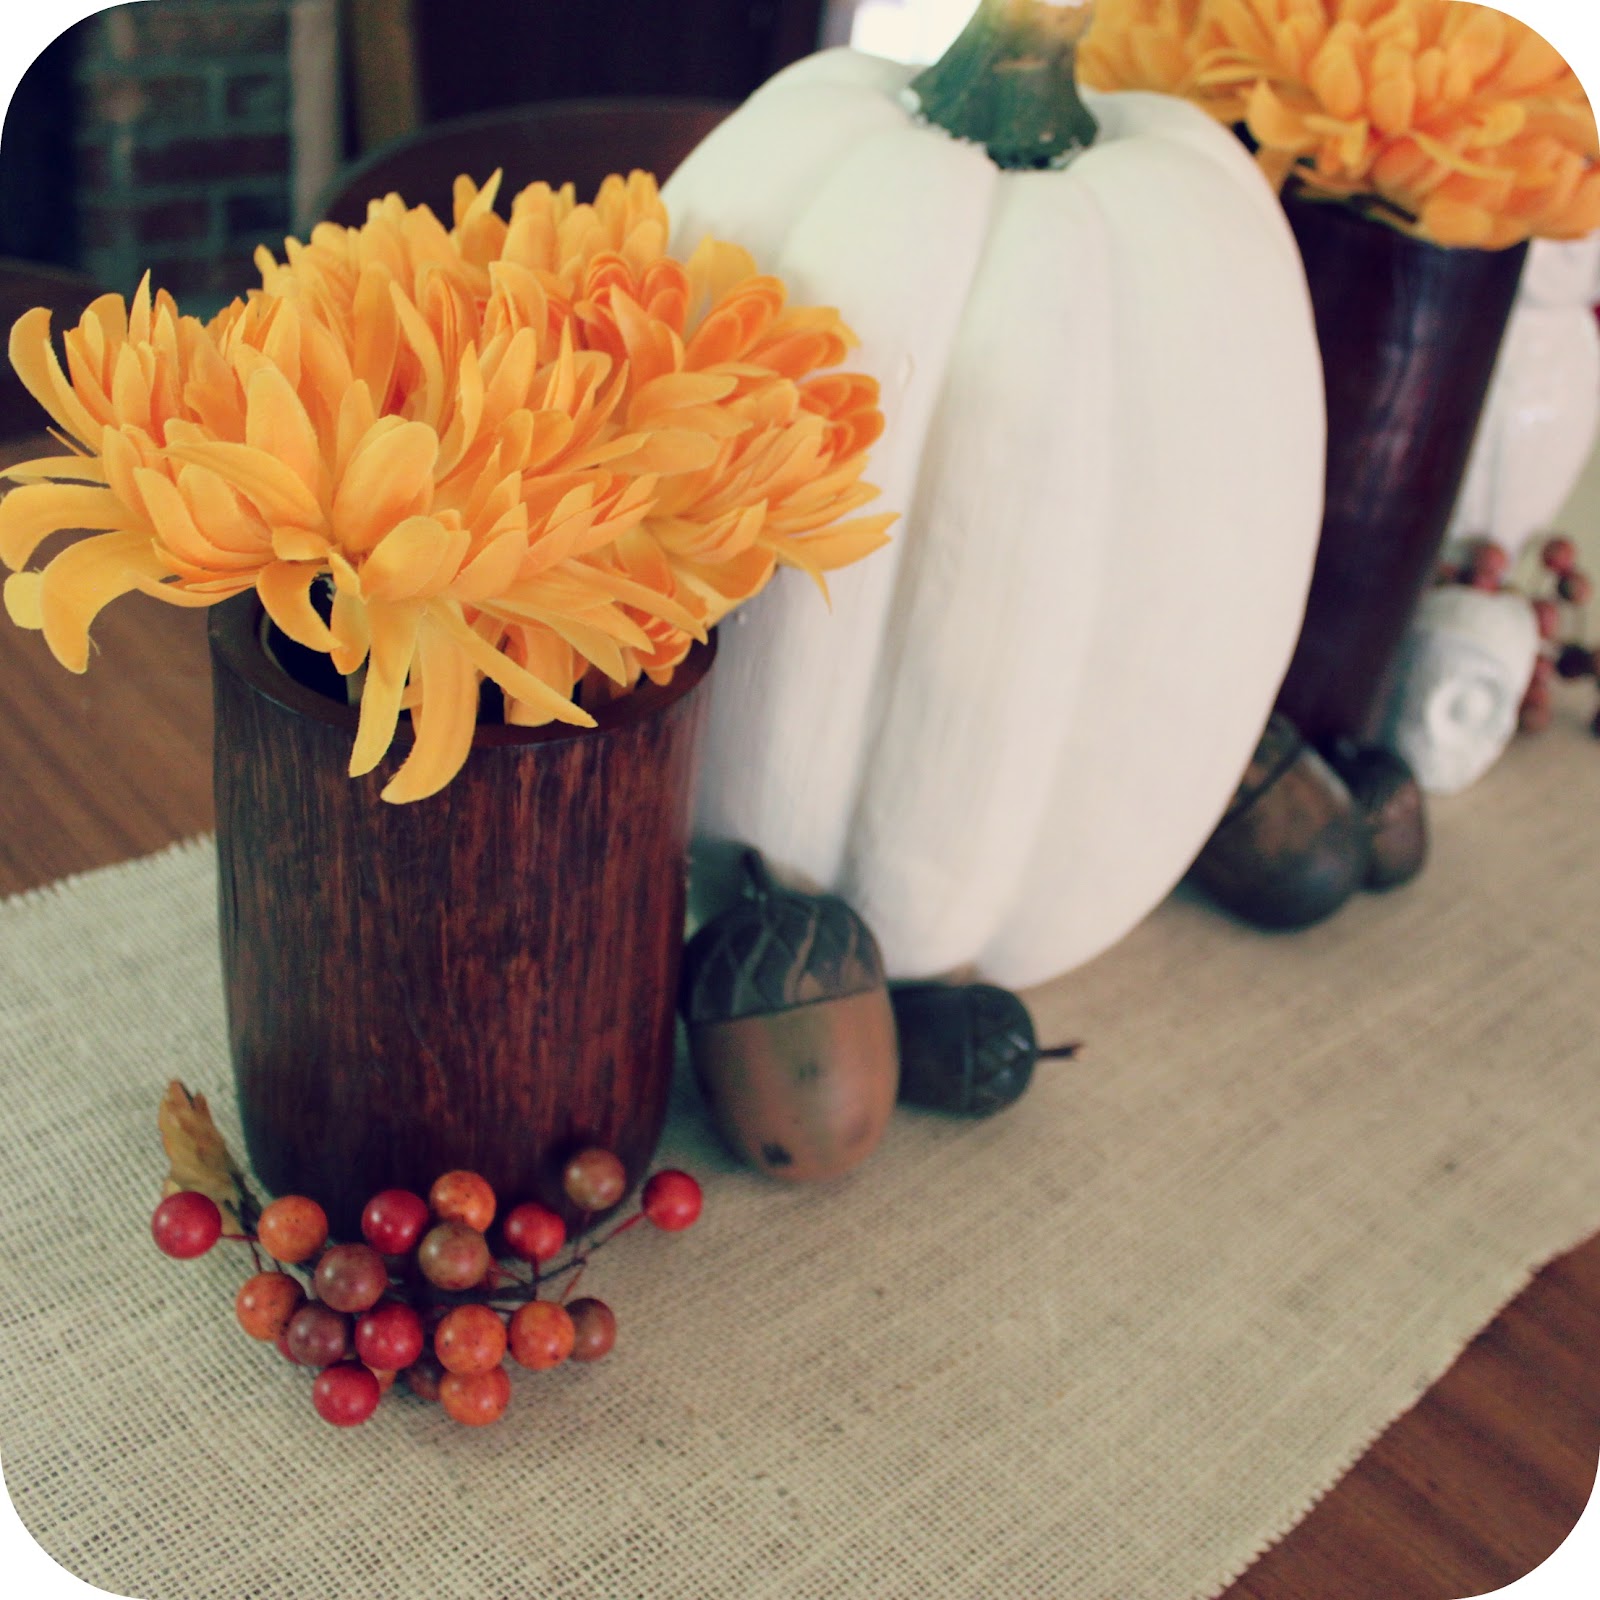 This Girl's Life: {our fall dining table}